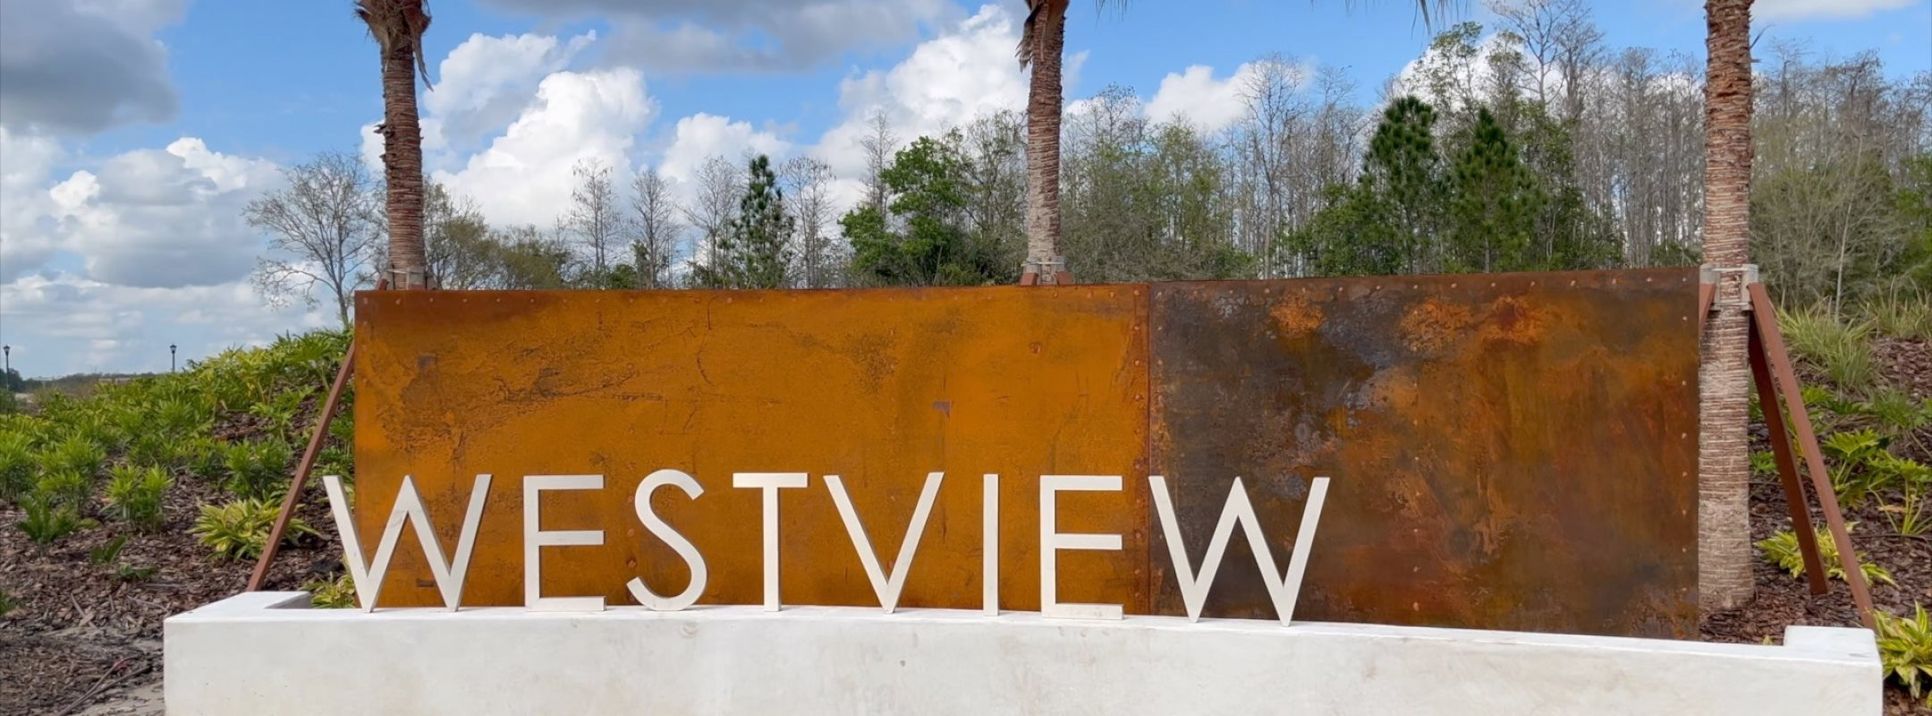 Westview monument sign